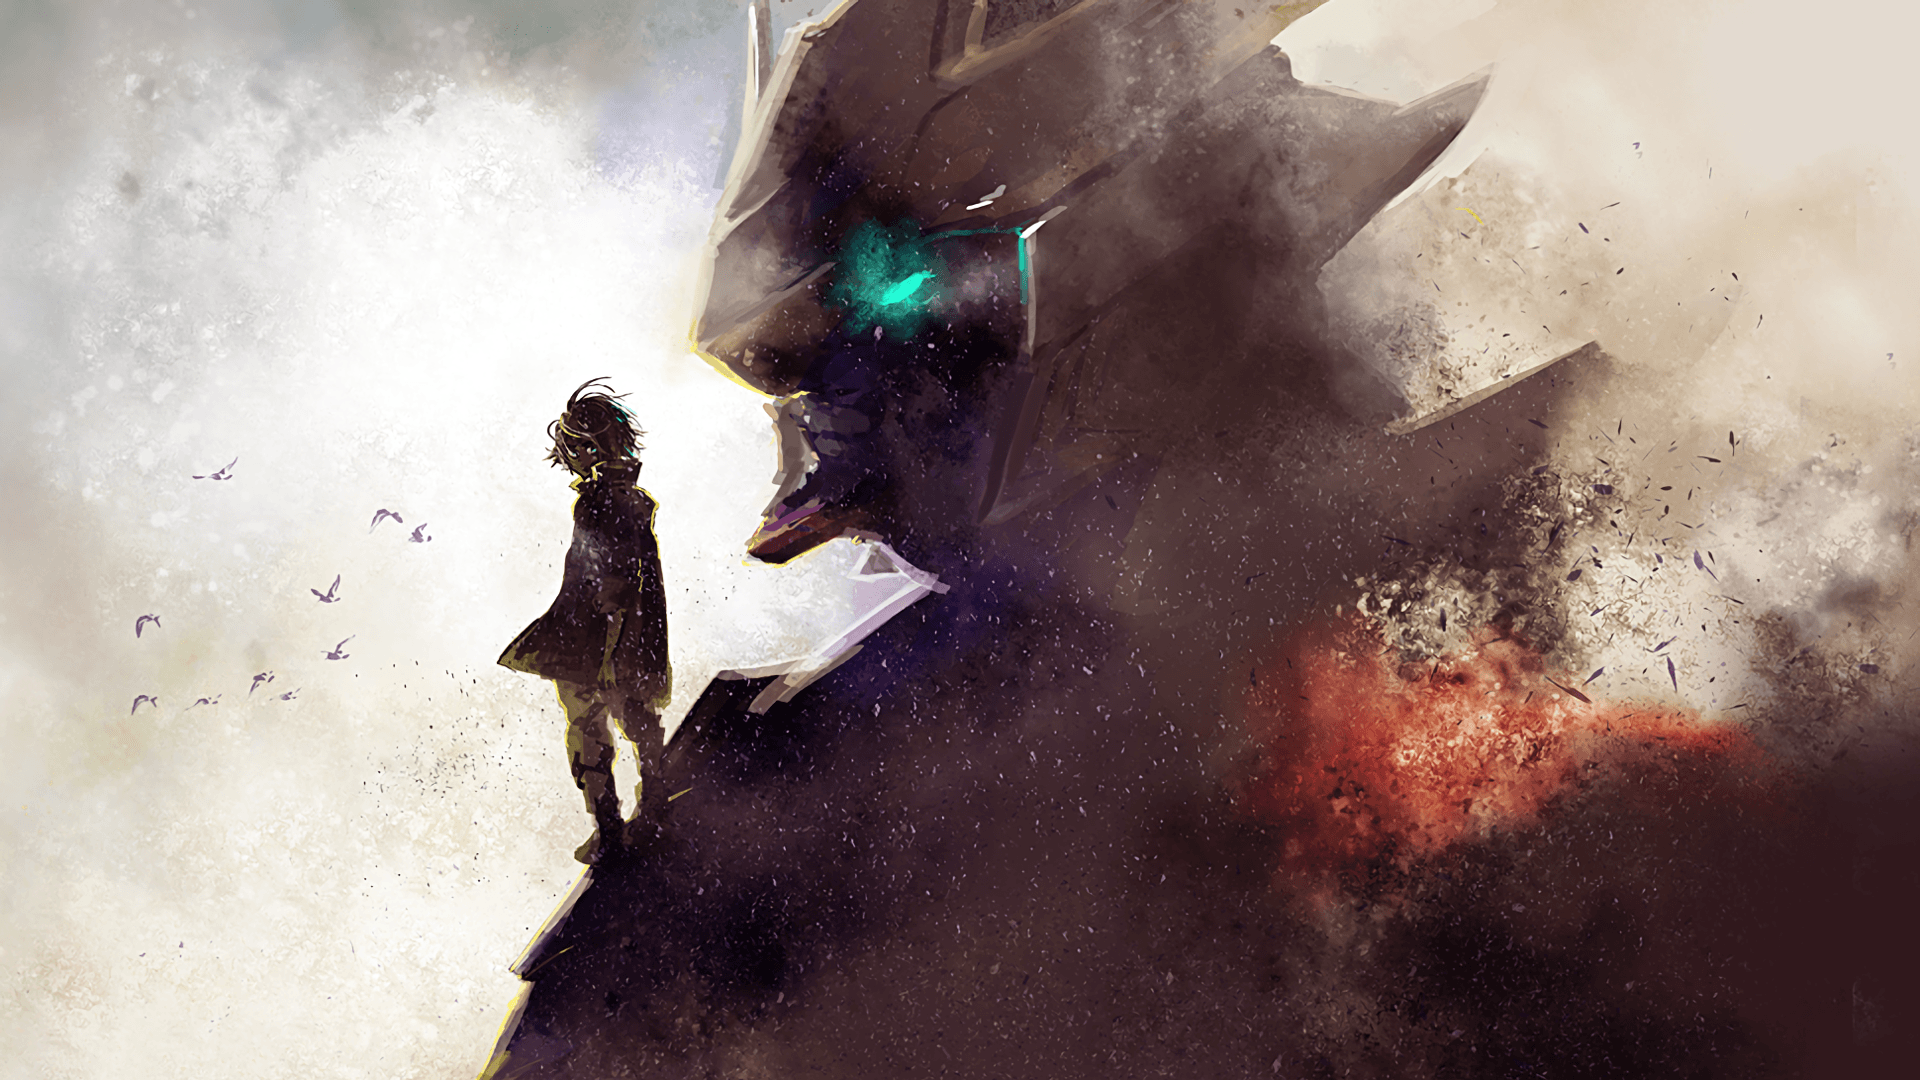 Mobile Suit Gundam: Iron Blooded Orphans HD Wallpaper